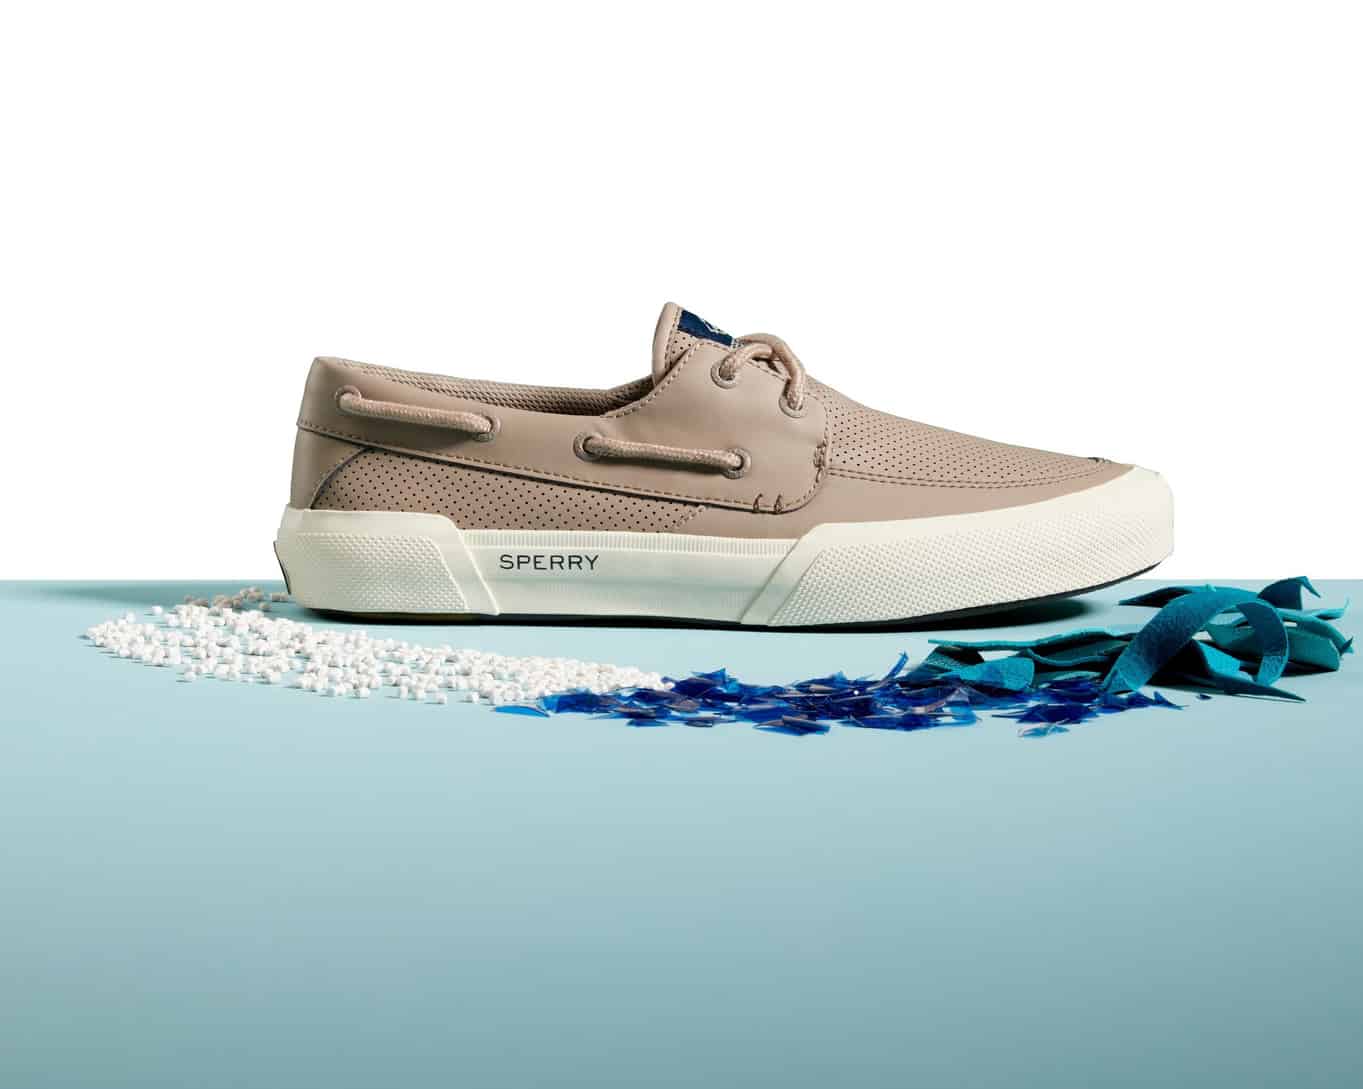 Sperry is dramatically expanding its SeaCycled Collection.